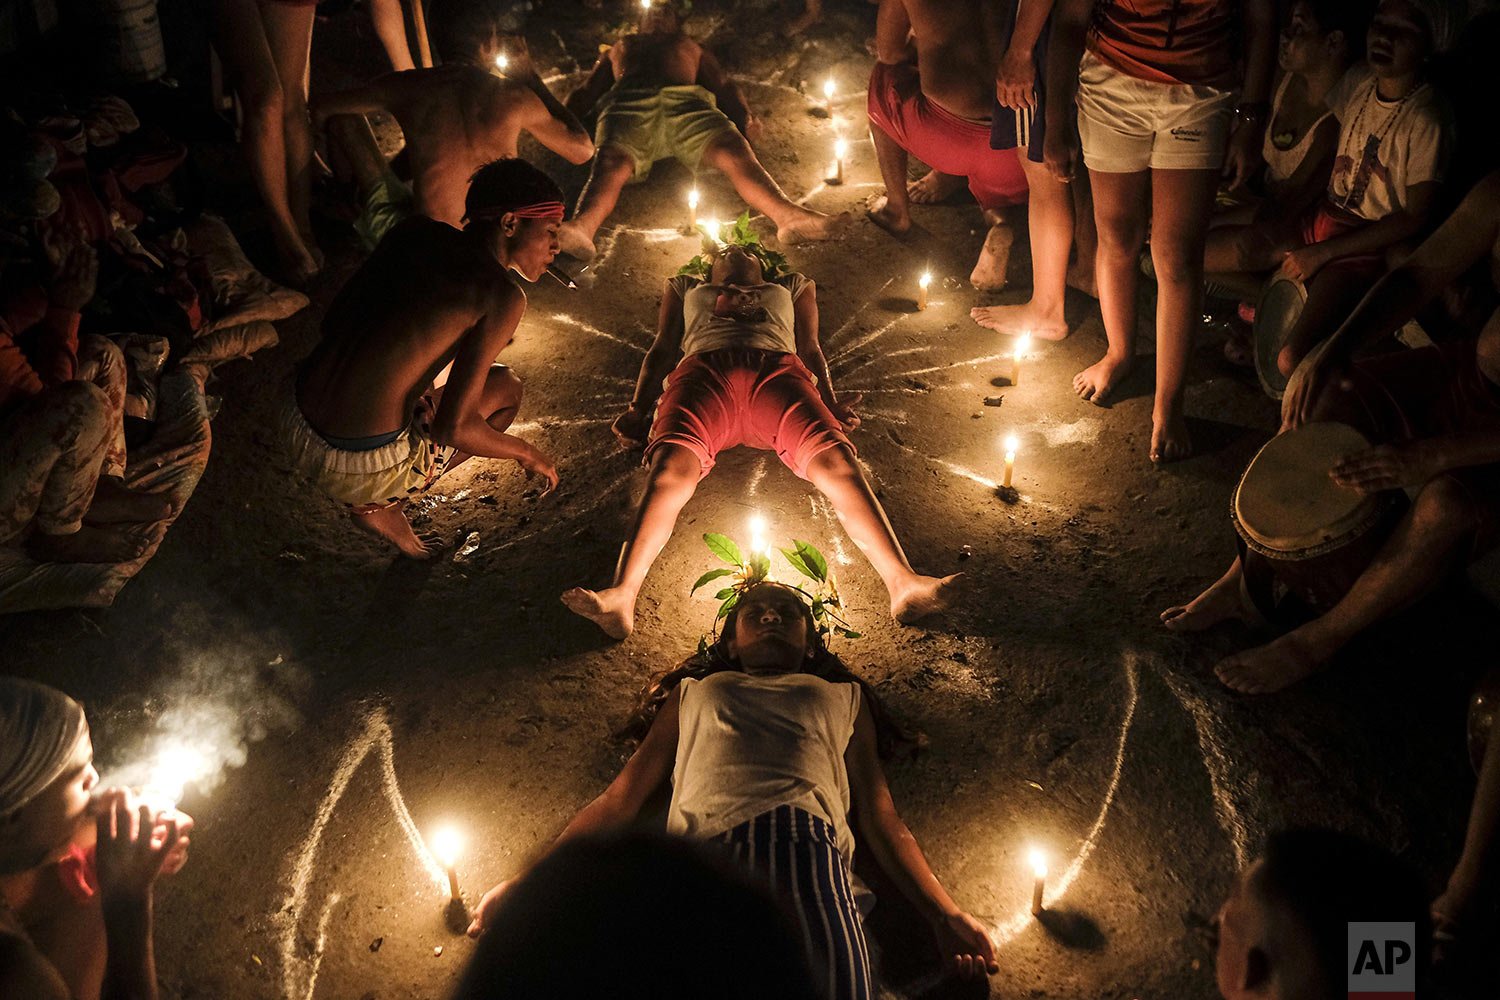  Followers of Maria Lionza's cult practice a ritual at Sorte Mountain in Venezuela's Yaracuy state, early Oct. 12, 2021, one year after the annual pilgrimage was cancelled due to COVID-19 restrictions. Along with Santeria, Venezuela is home to other 